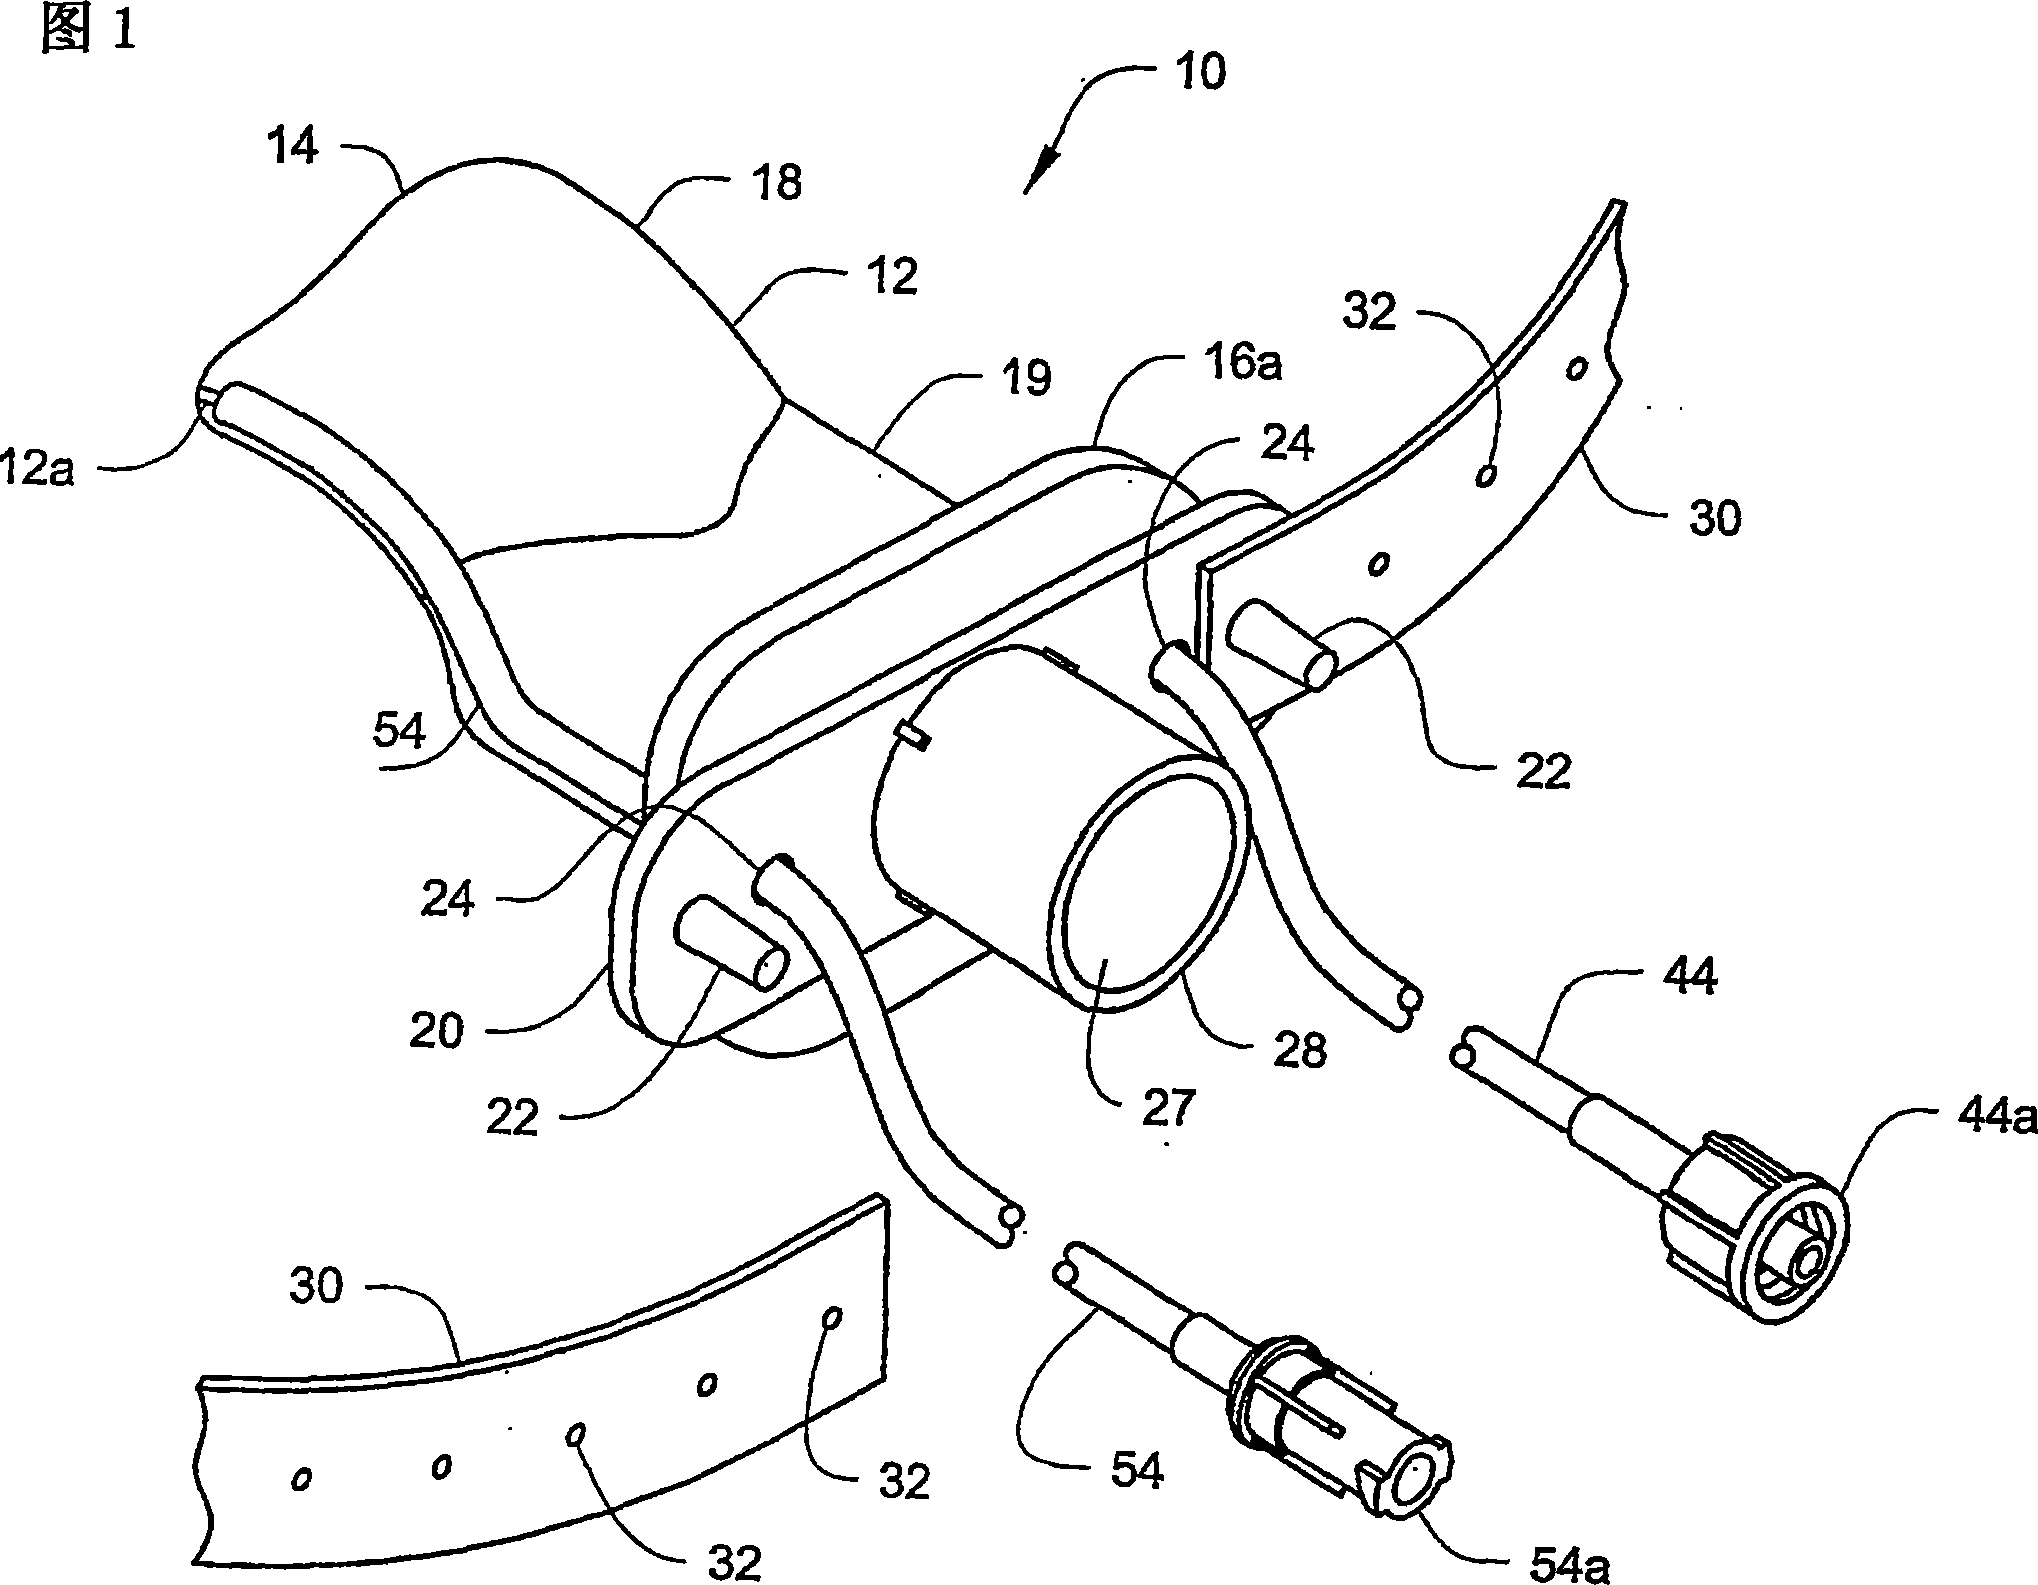 Apparatus for maintaining a surgical airway and method of the same